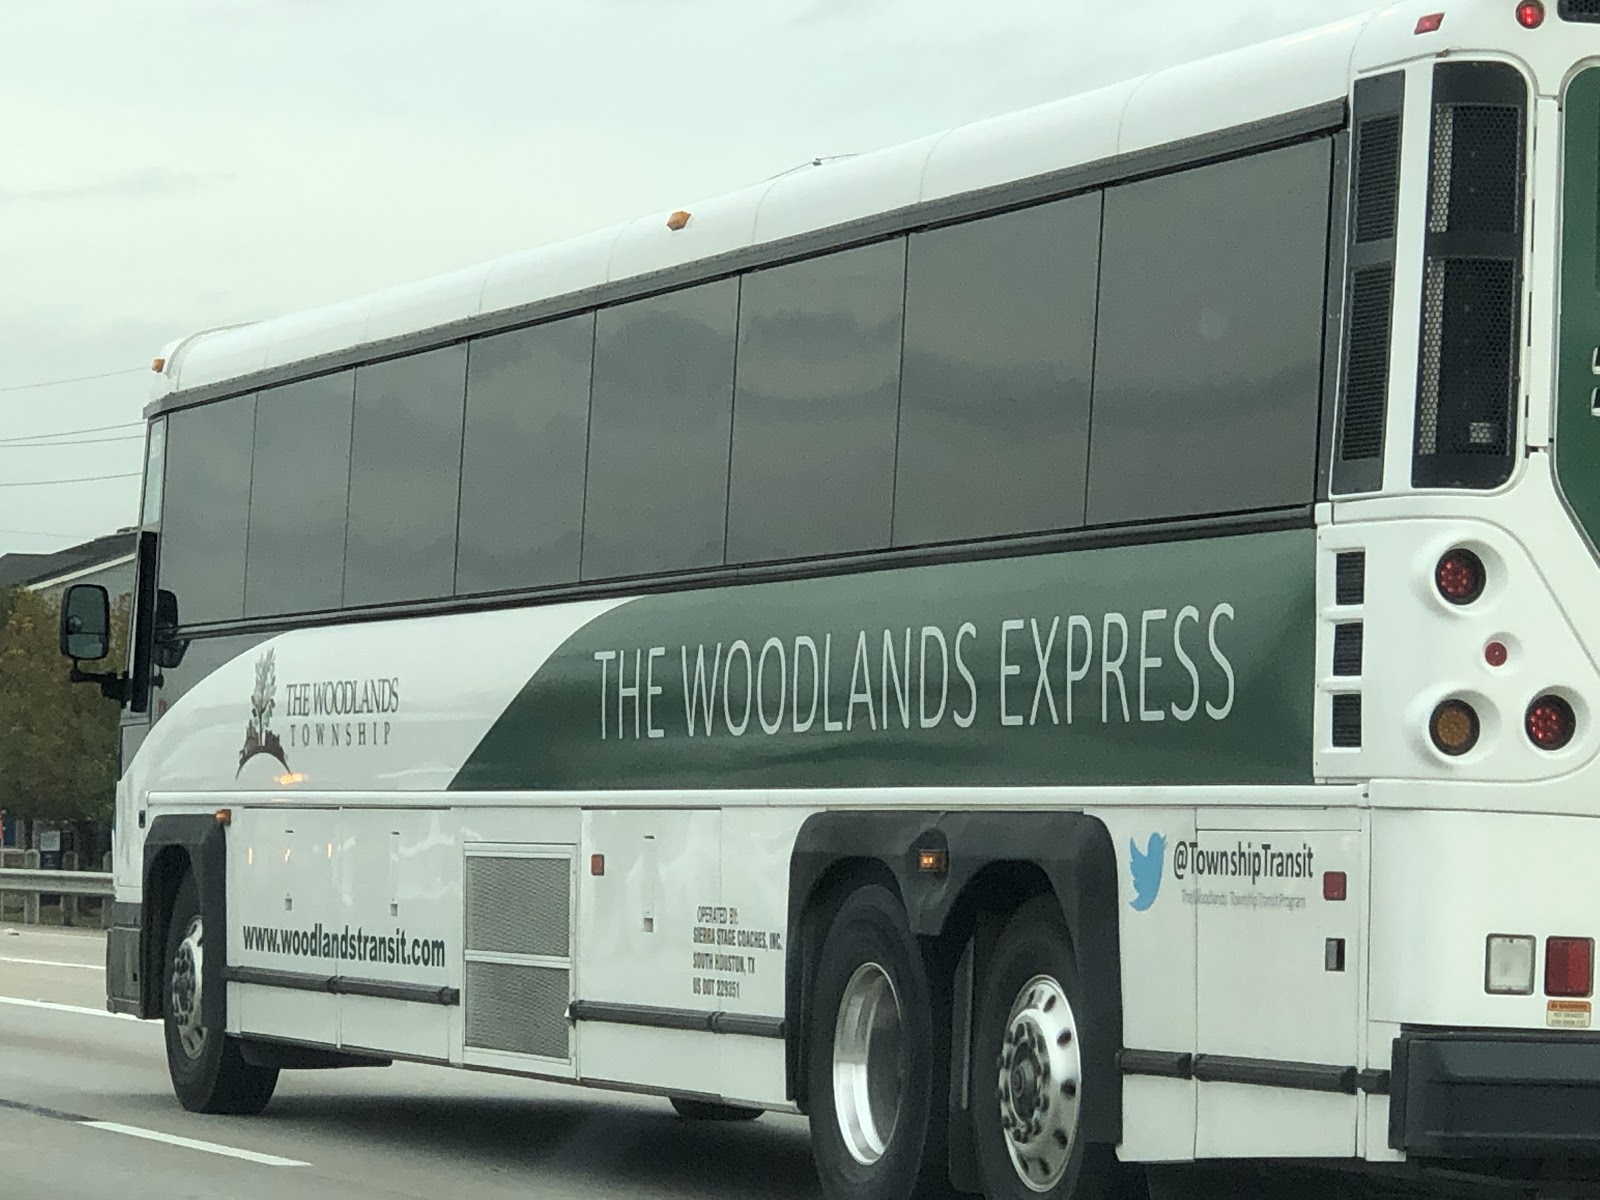 A white and hunter green bus with white lettering that says "The Woodlands Express"